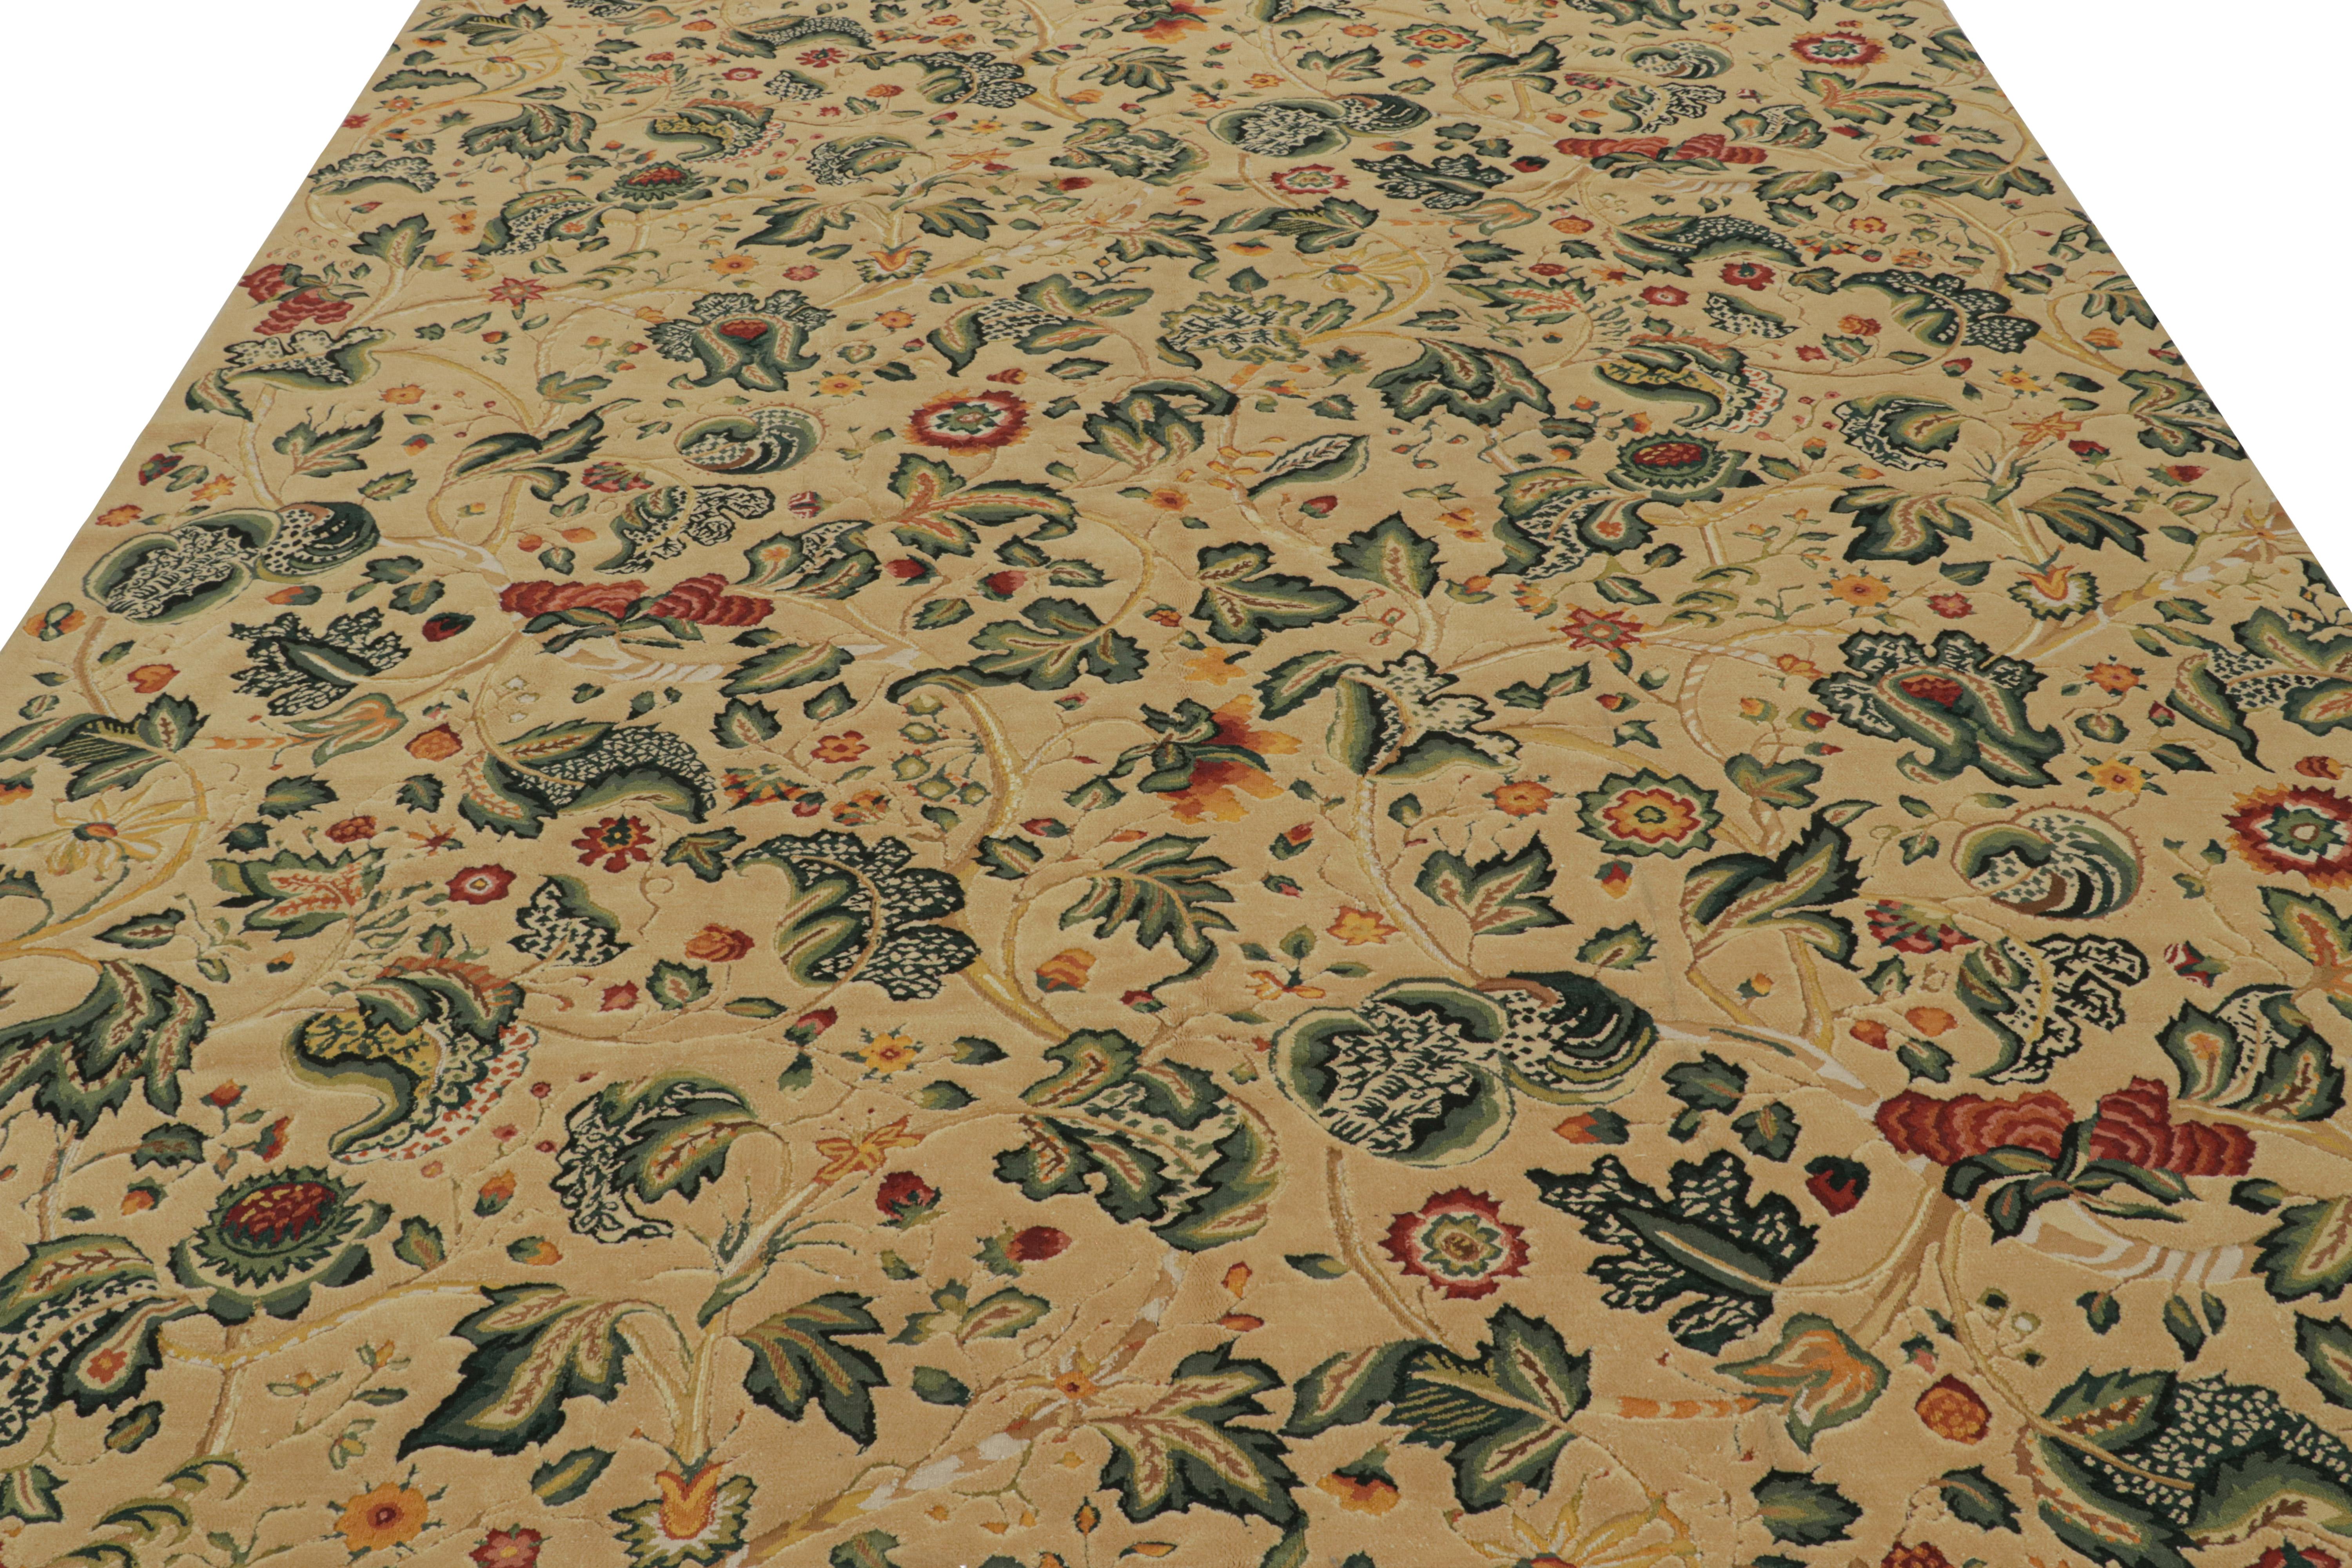 Chinese Rug & Kilim’s European Style Flatweave Rug in Cream with Floral Patterns ‘Tudor’ For Sale